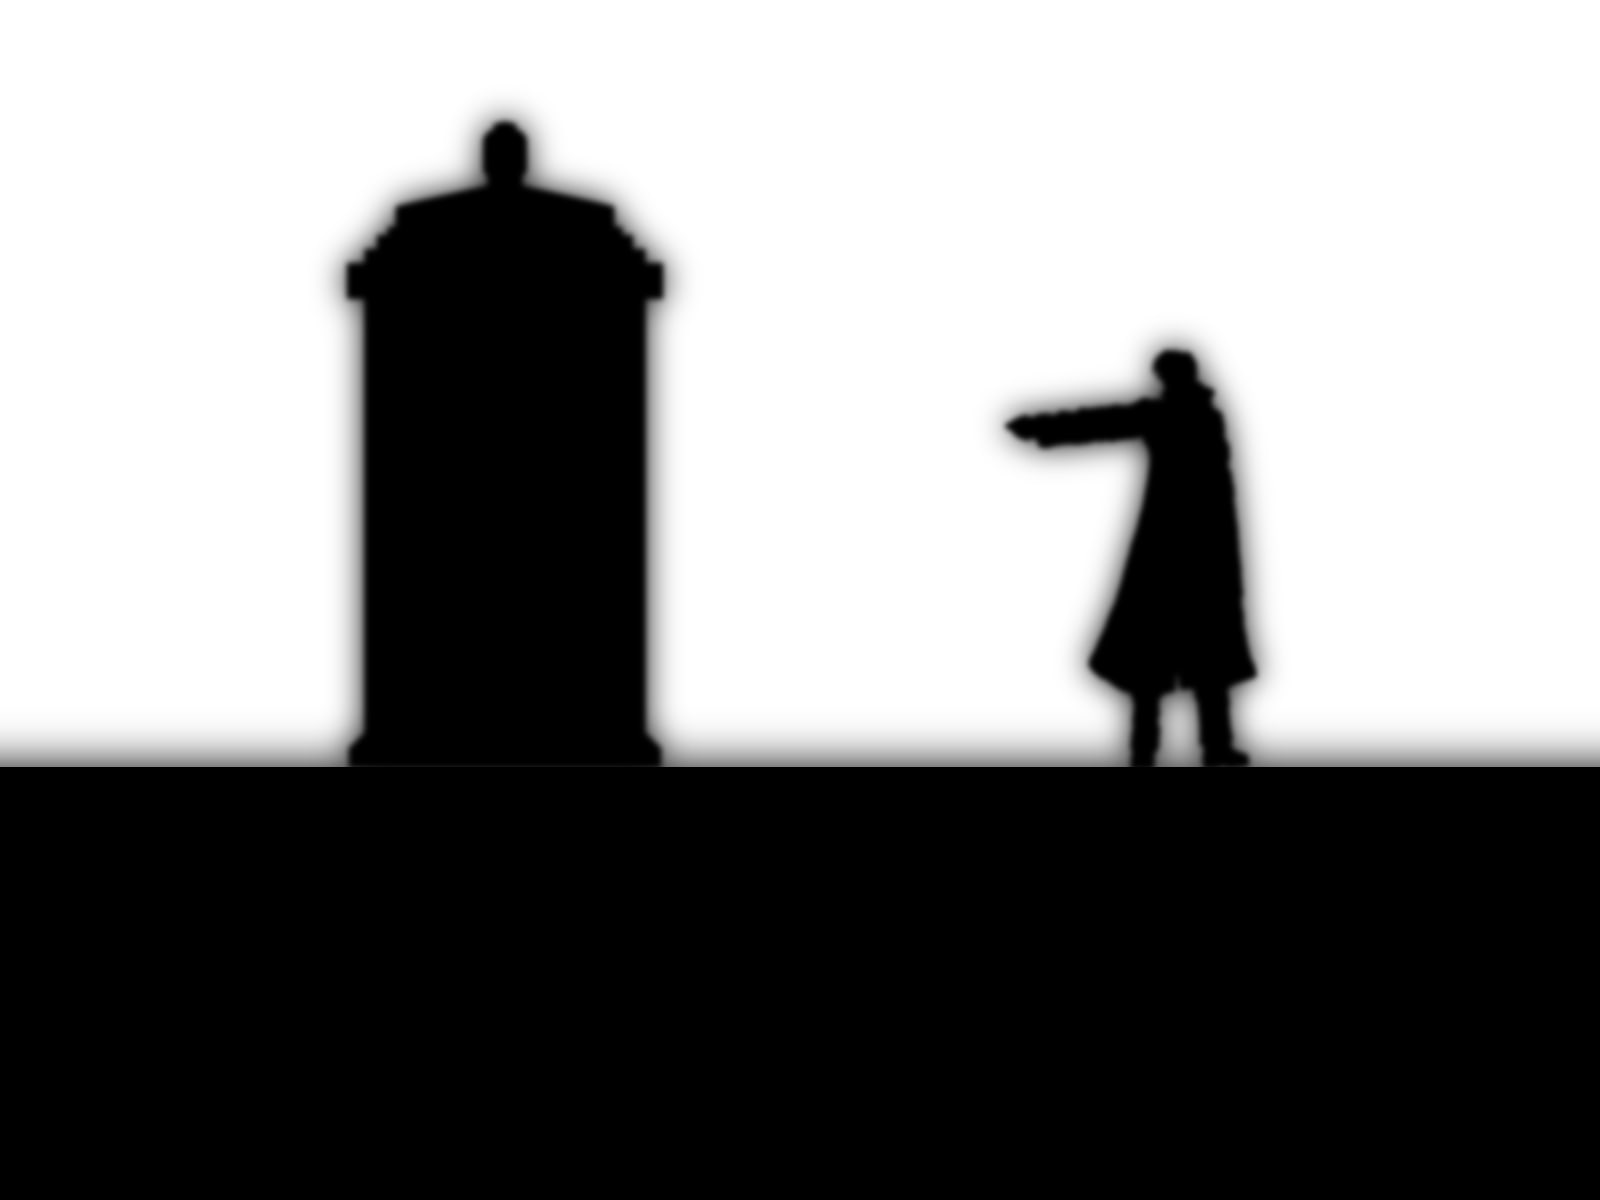 Doctor Who, Tenth Doctor, silhouette, monochrome, one person